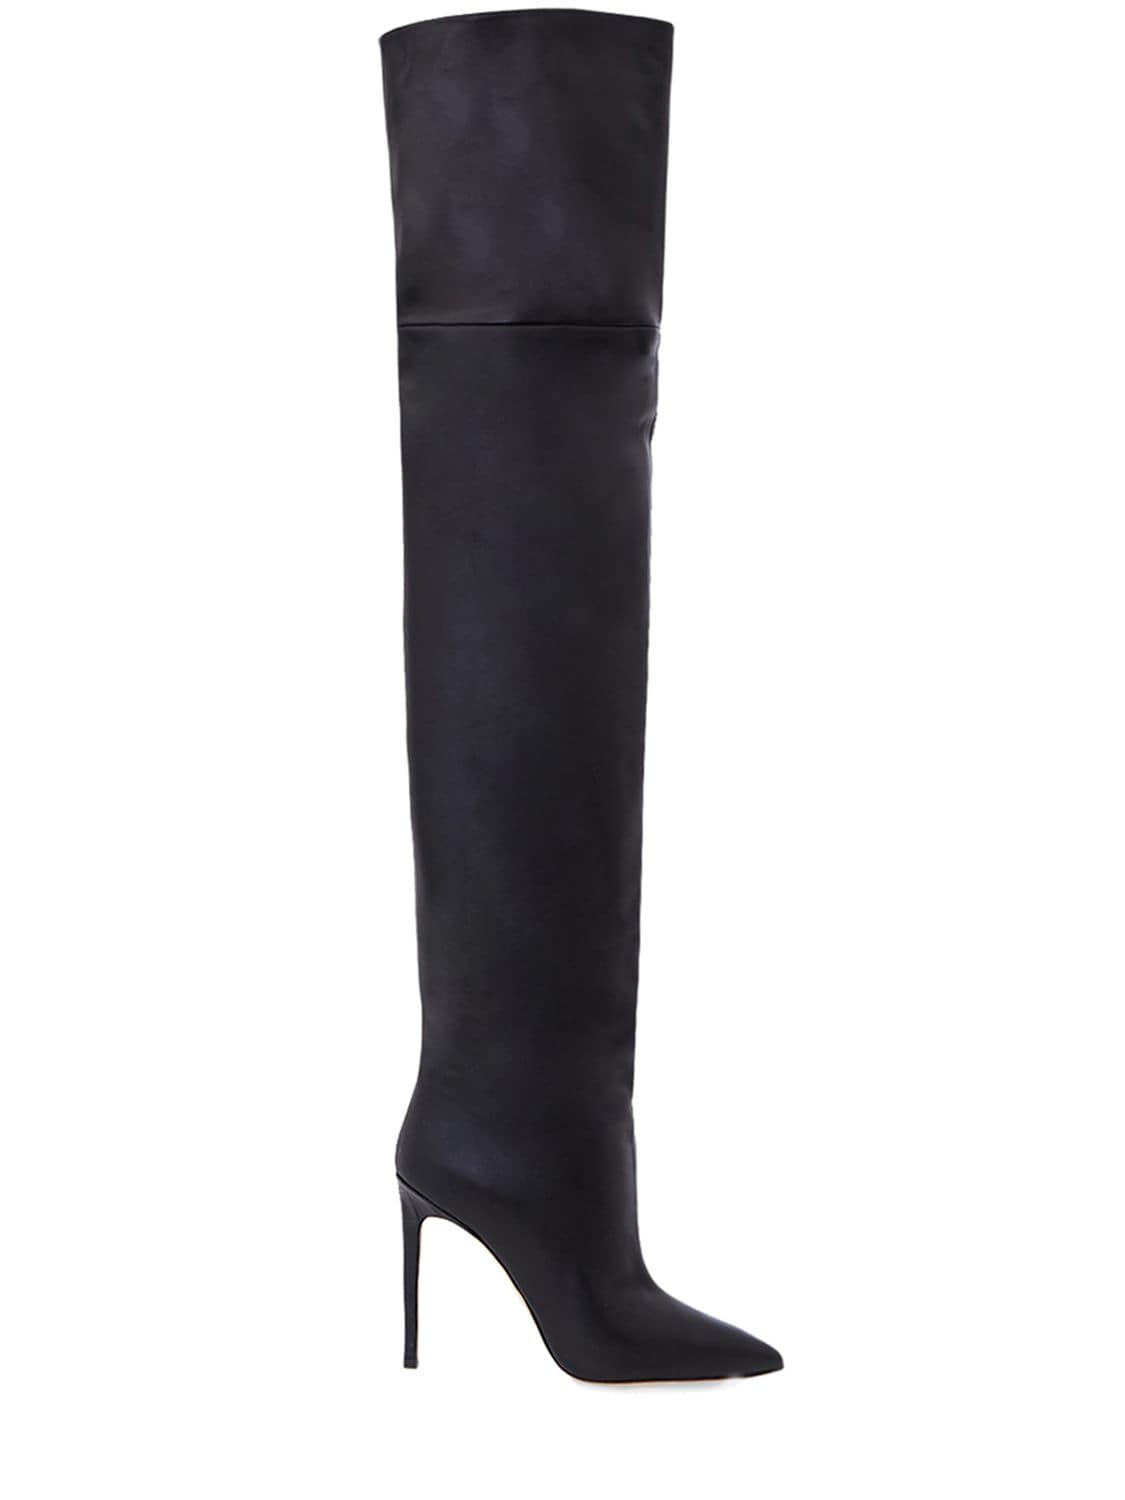 Paris Texas 105mm Leather Over-the-knee Boots In Black Wash